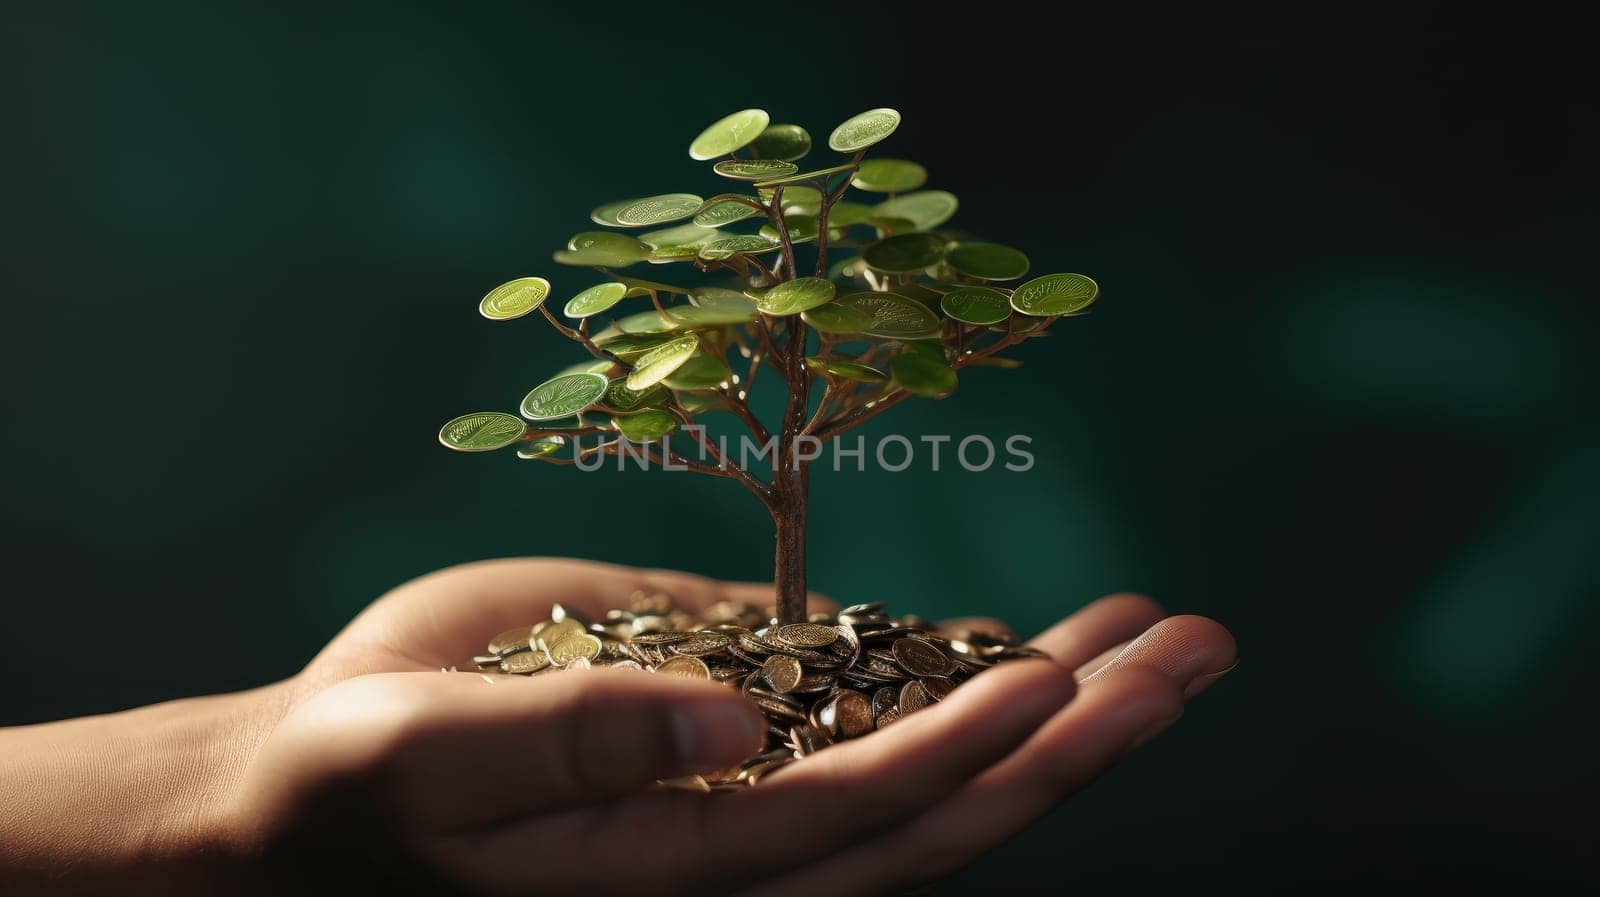 Hand Cradles Sapling on Silver Coins. Green Business Ideas for Finance and Investment. Conceptual Image Illustrating Carbon Credits and Eco-Friendly Taxation. Sustainable Financial Strategies. by ViShark